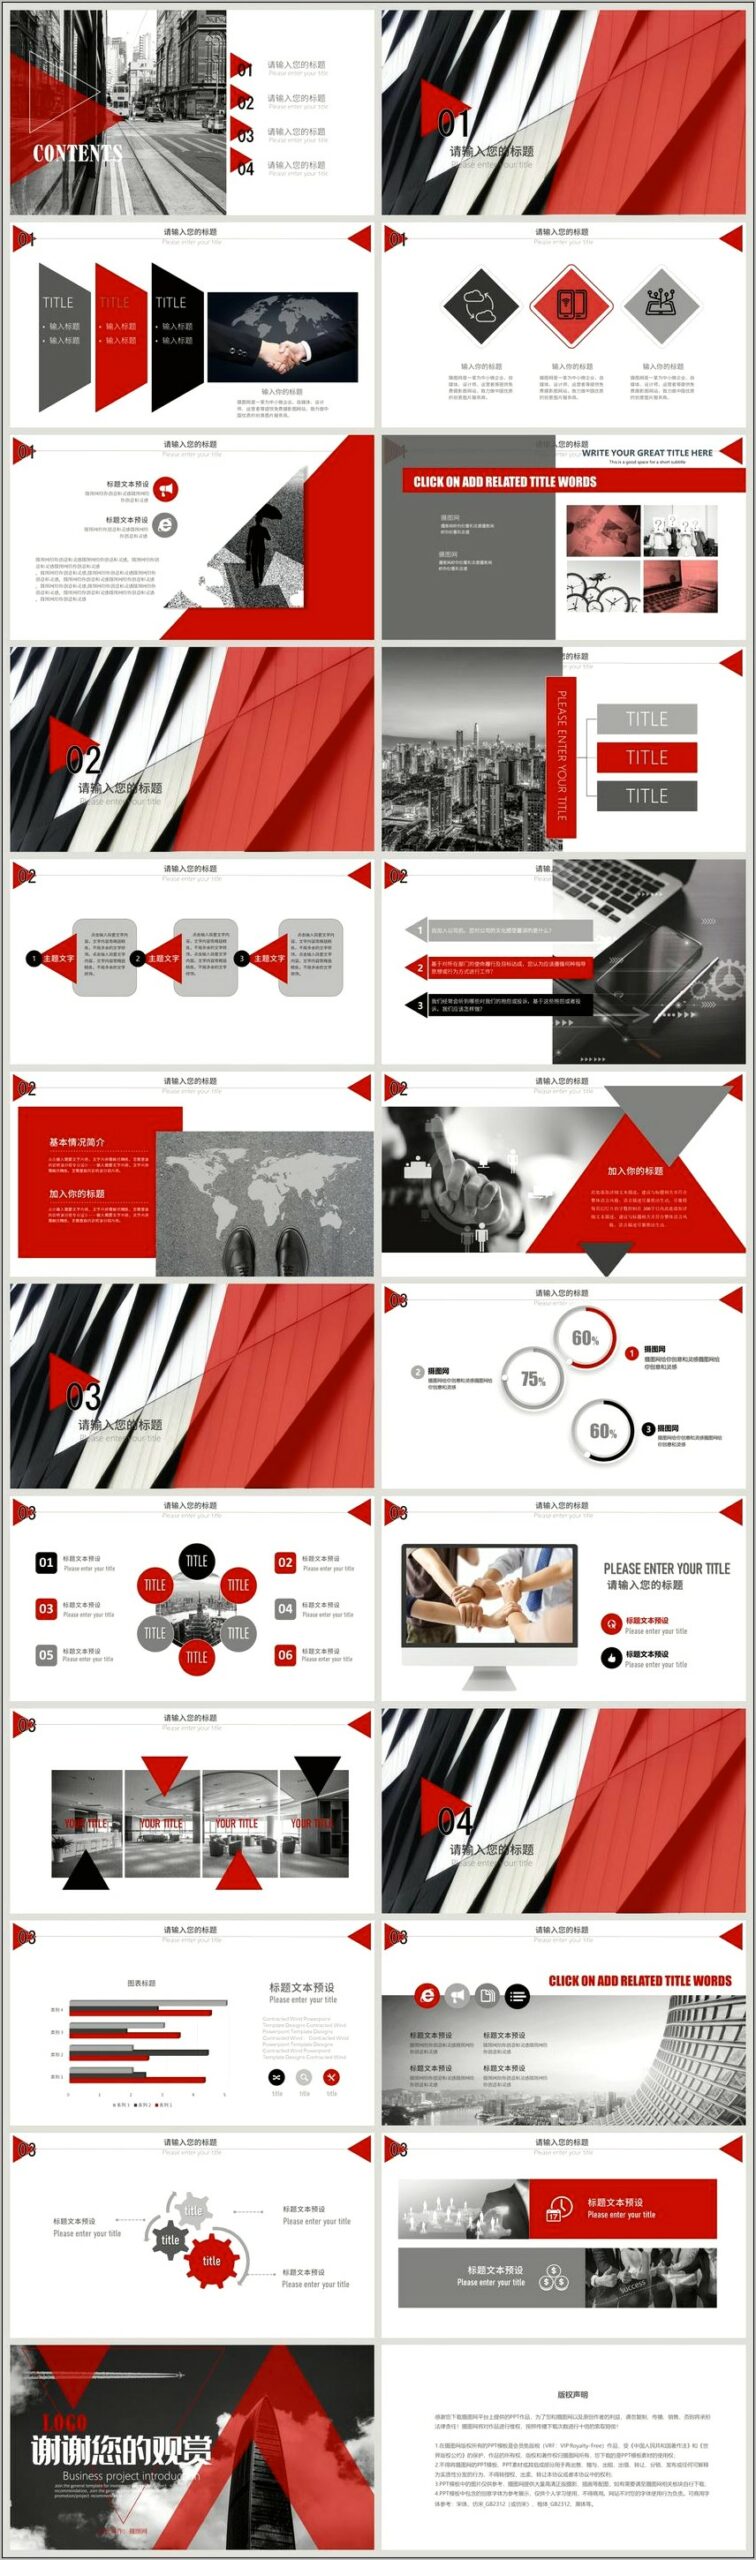 Ppt Templates Free Download Project Presentation